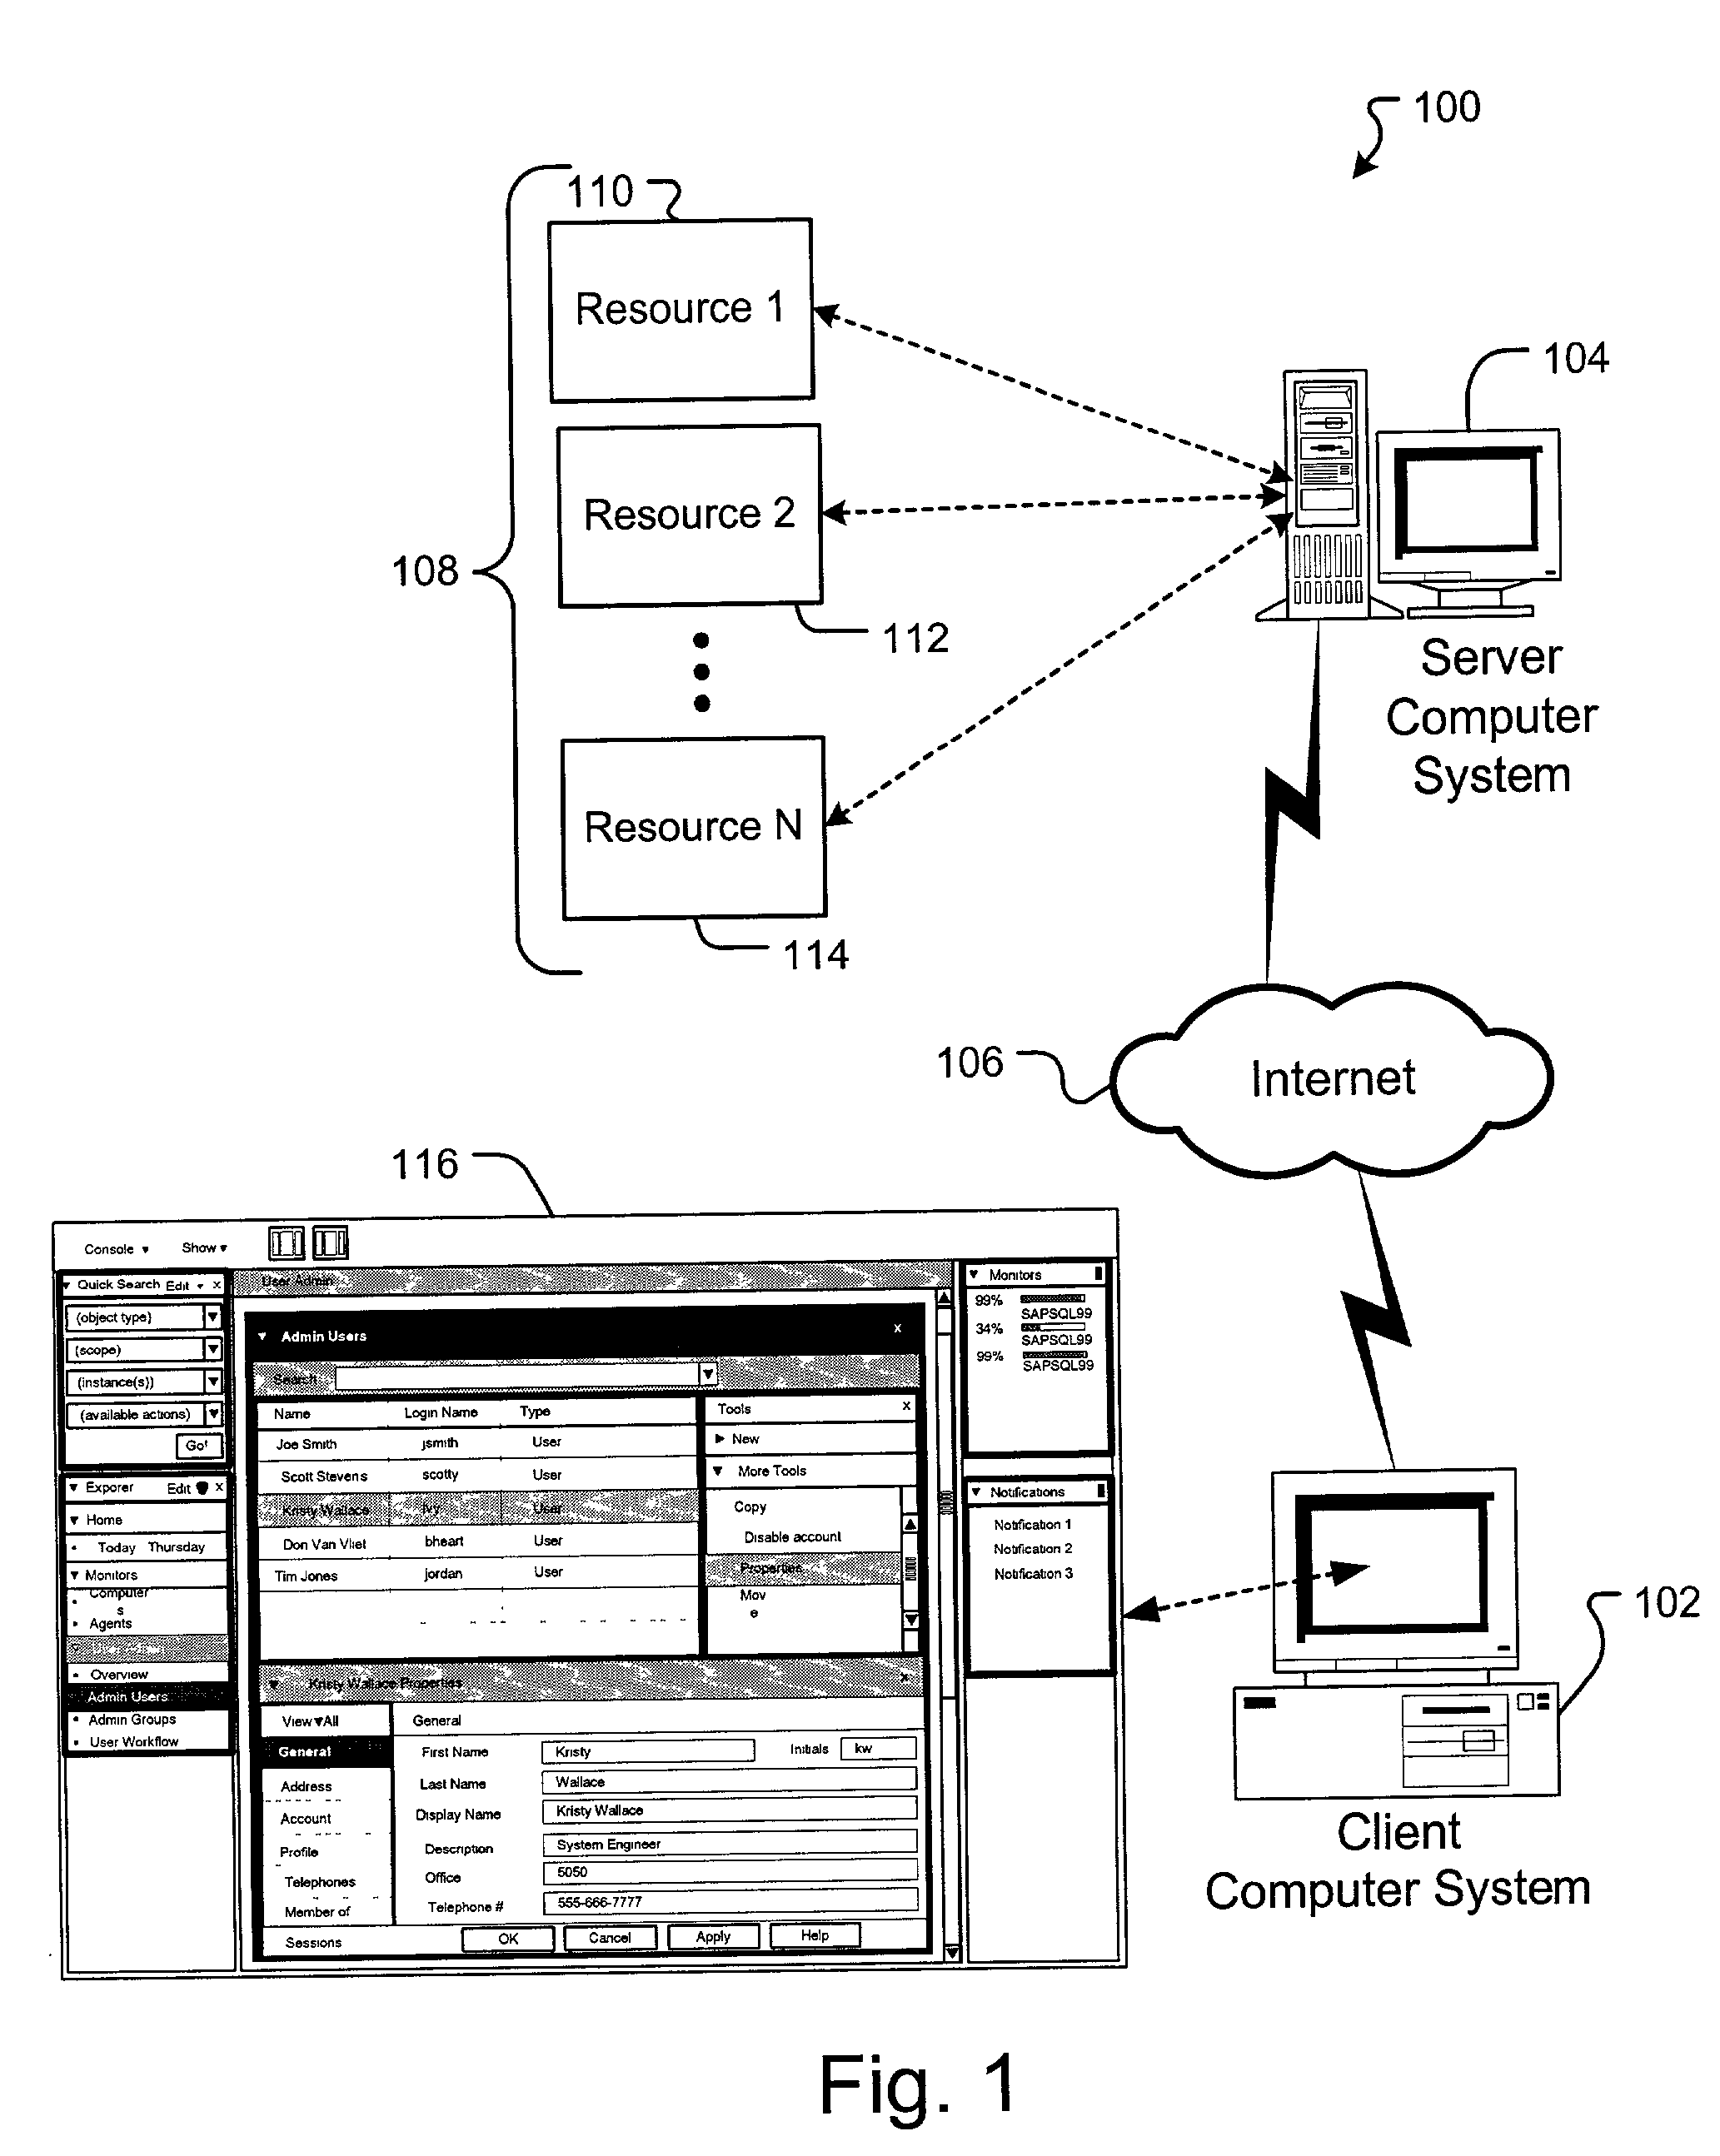 User interface for managing multiple network resources